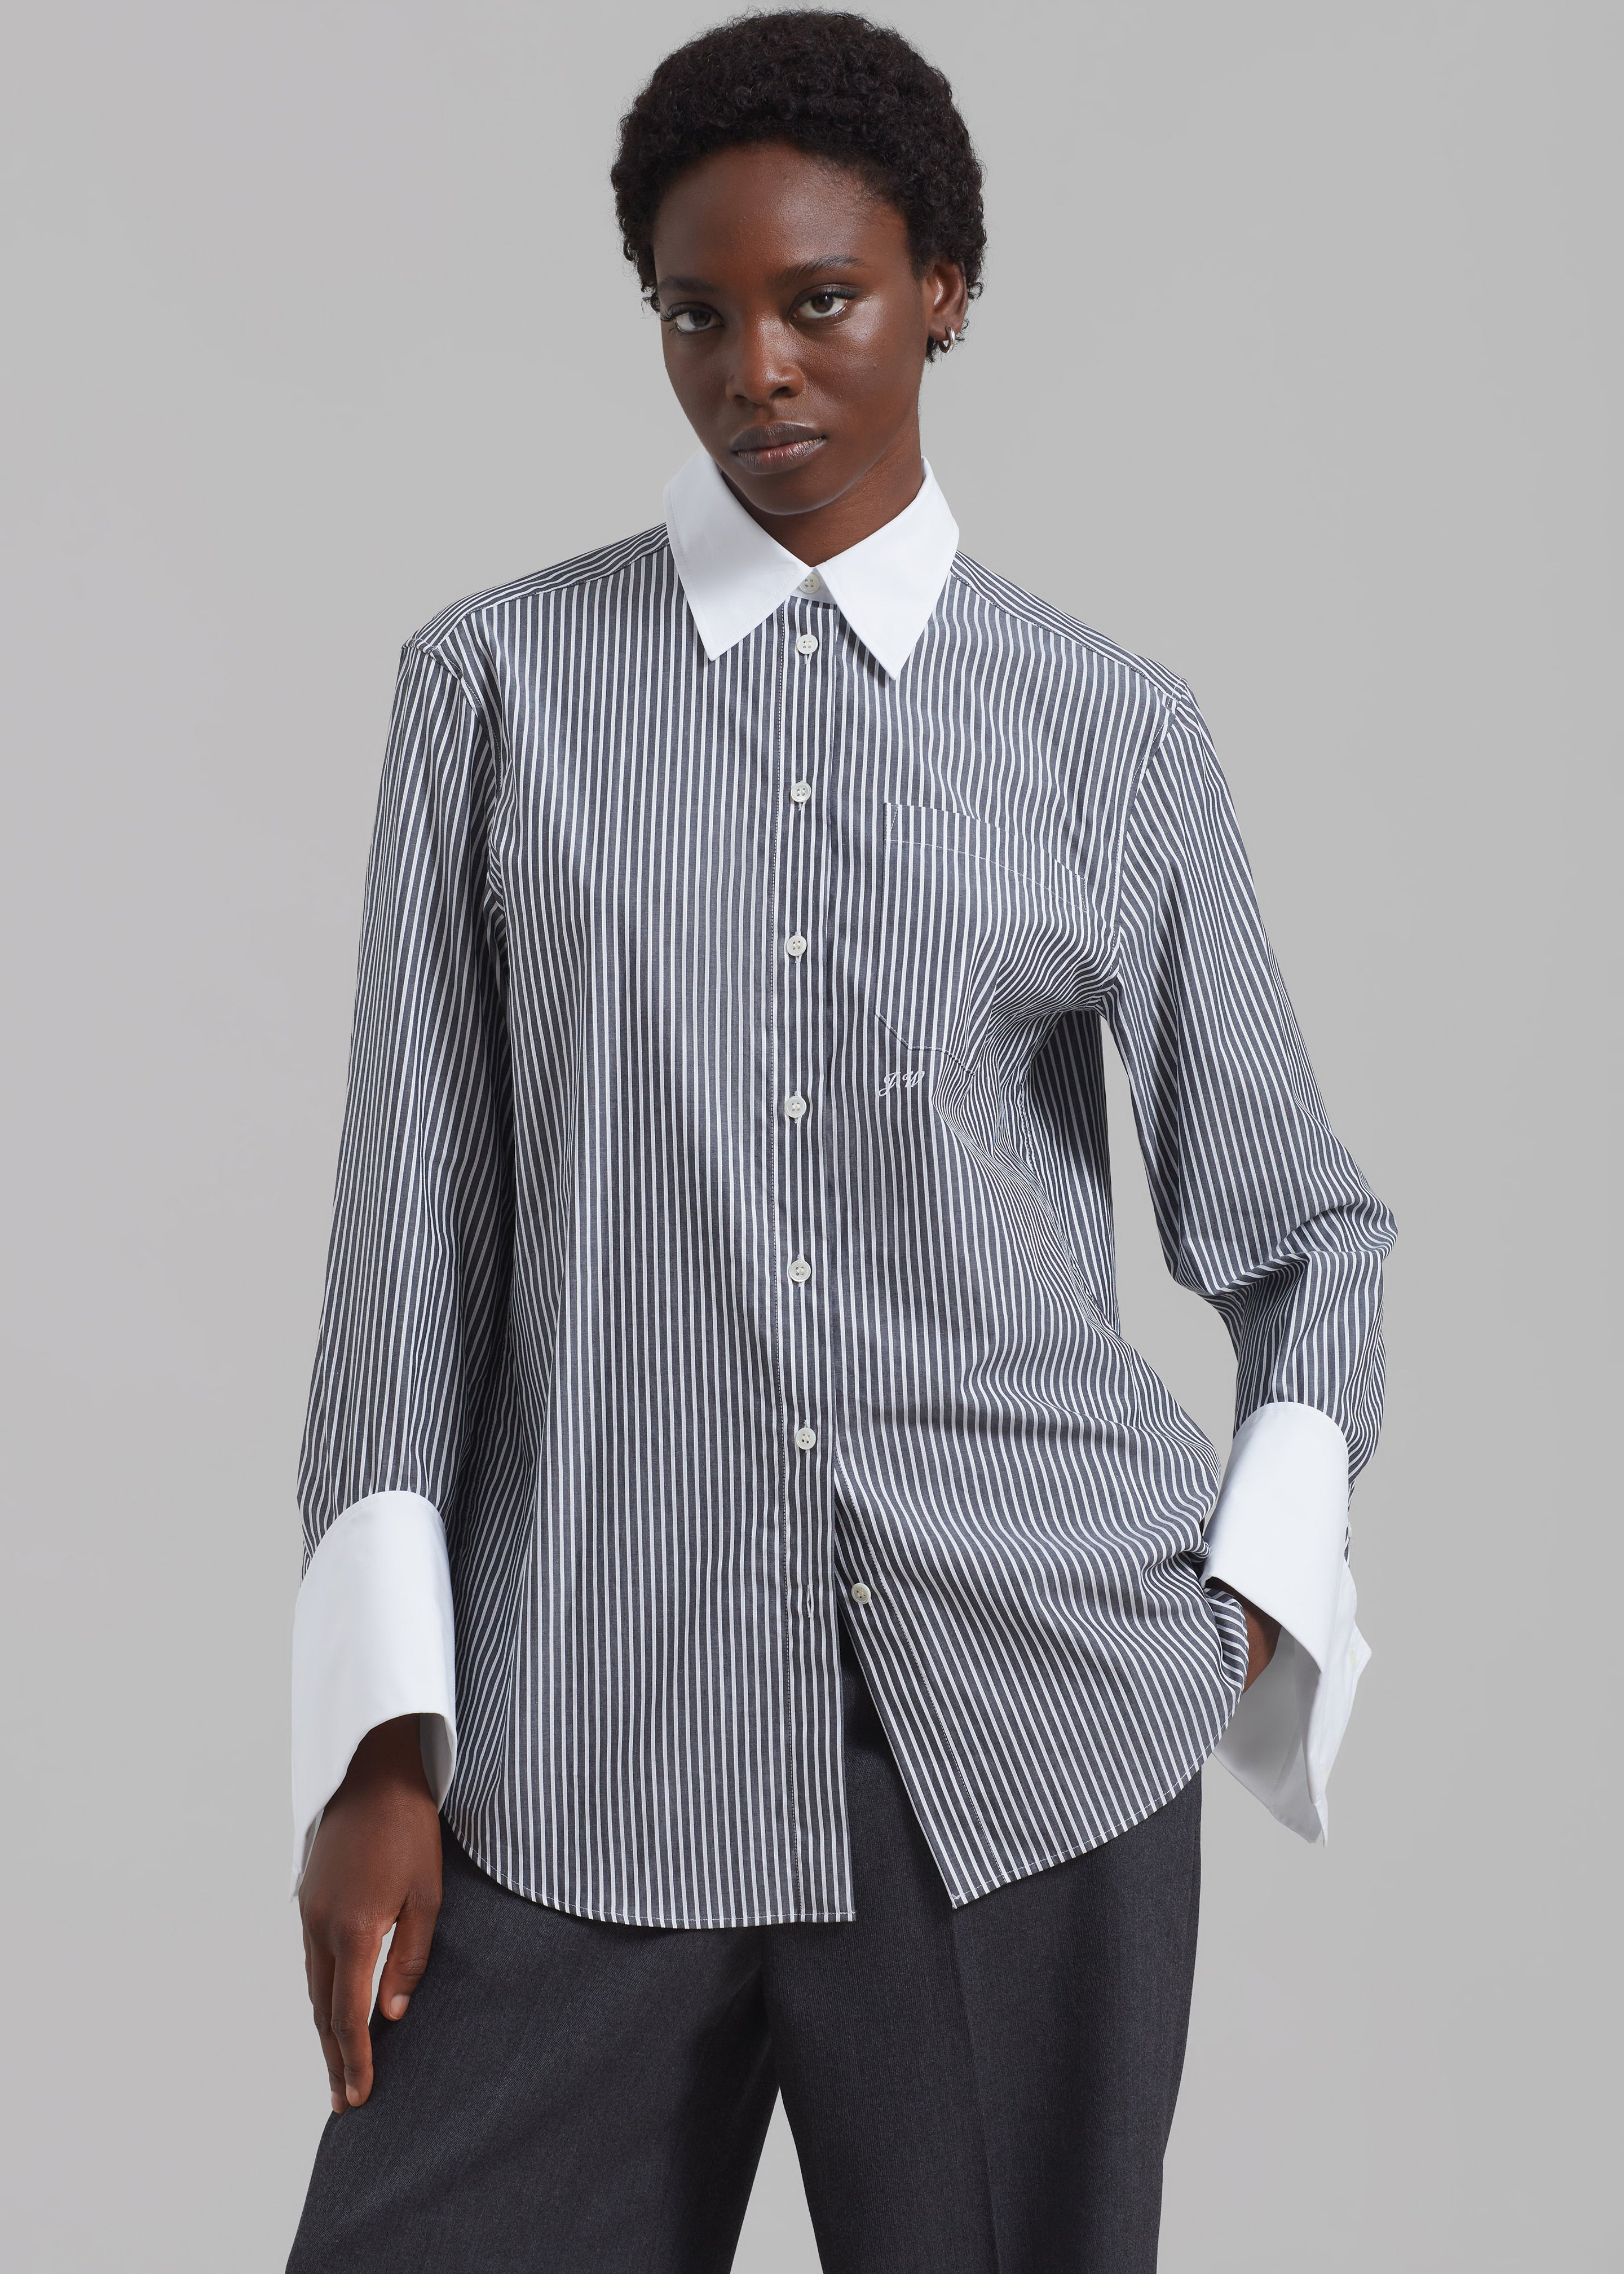 JW Anderson Oversized Cuff Shirt - Charcoal/White - 4